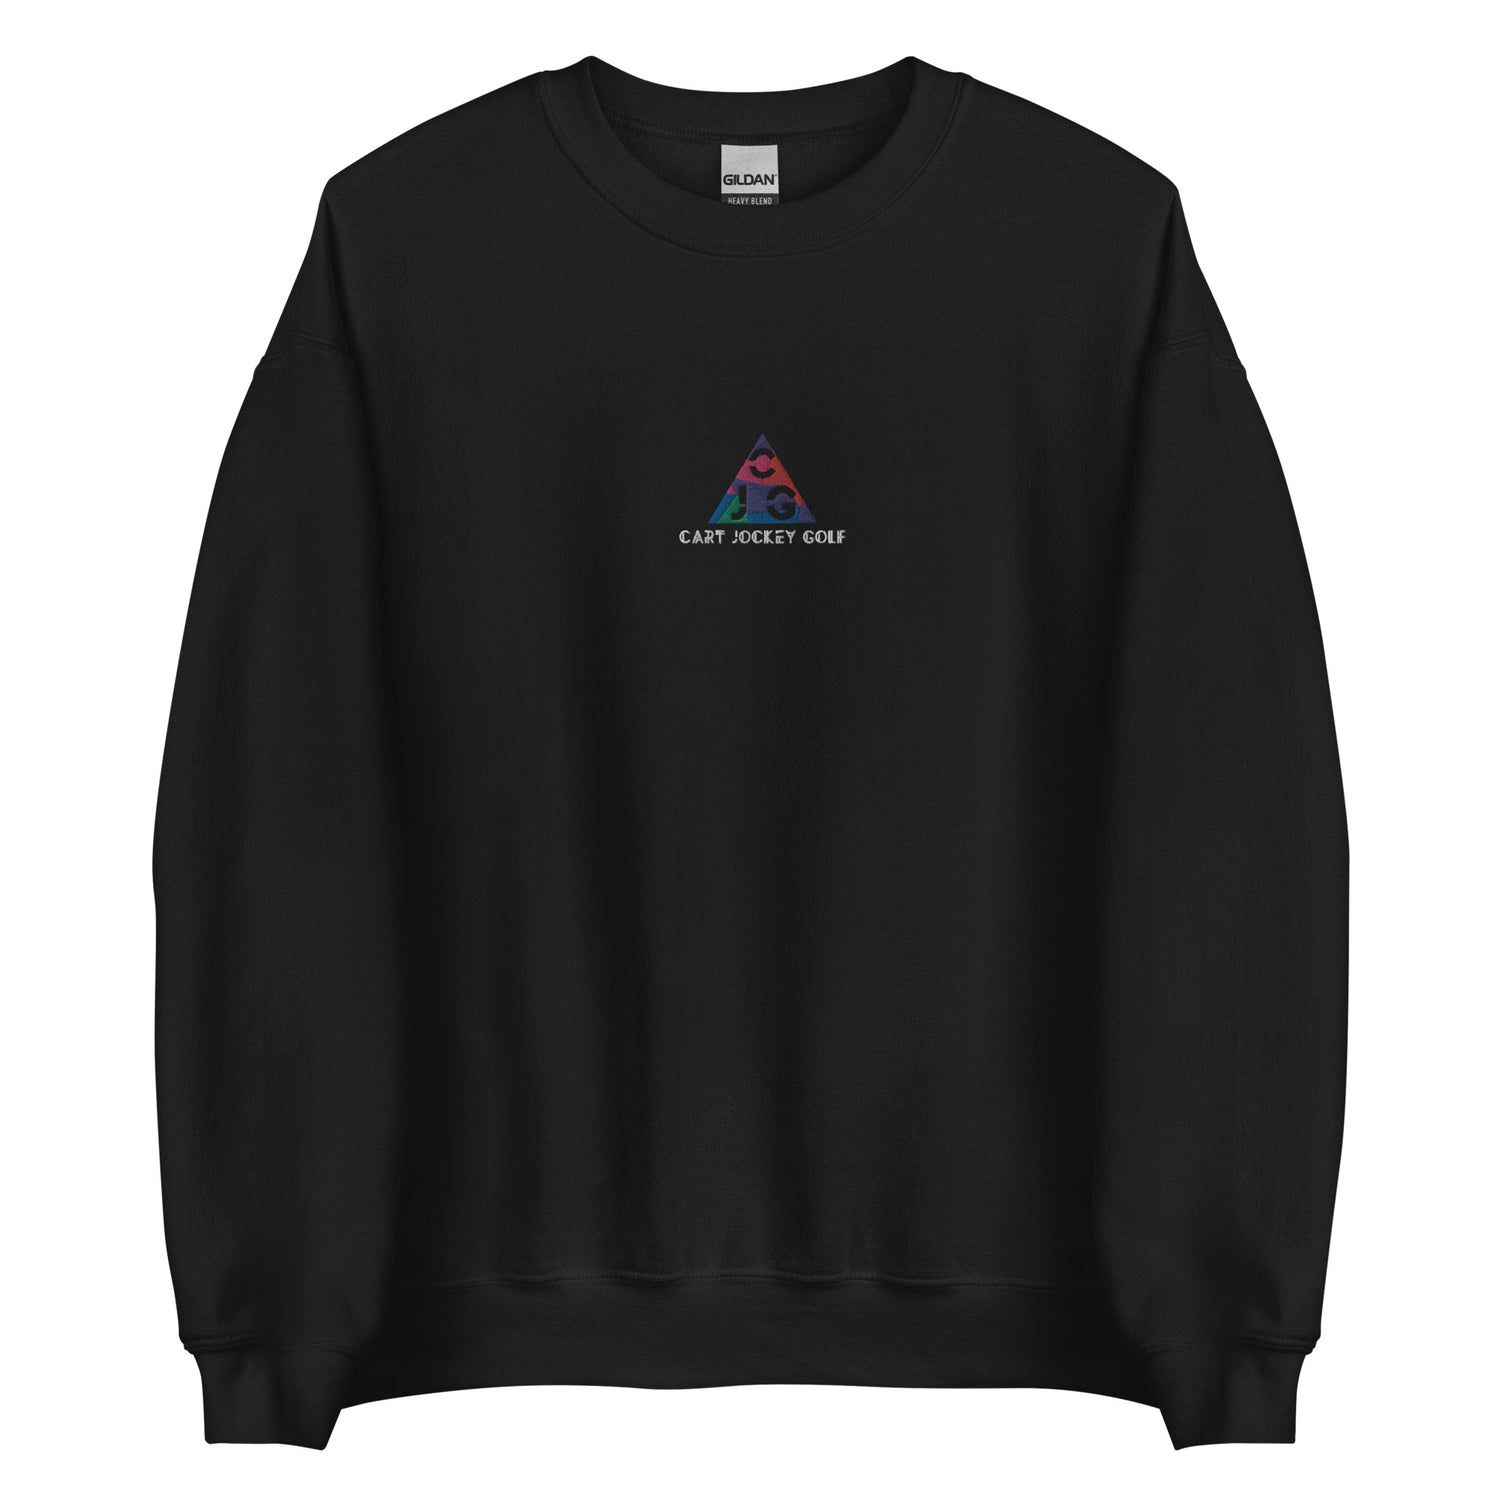 a black Triangle Embroidered Crewneck with an image of a triangle on it by Cart Jockey Golf.